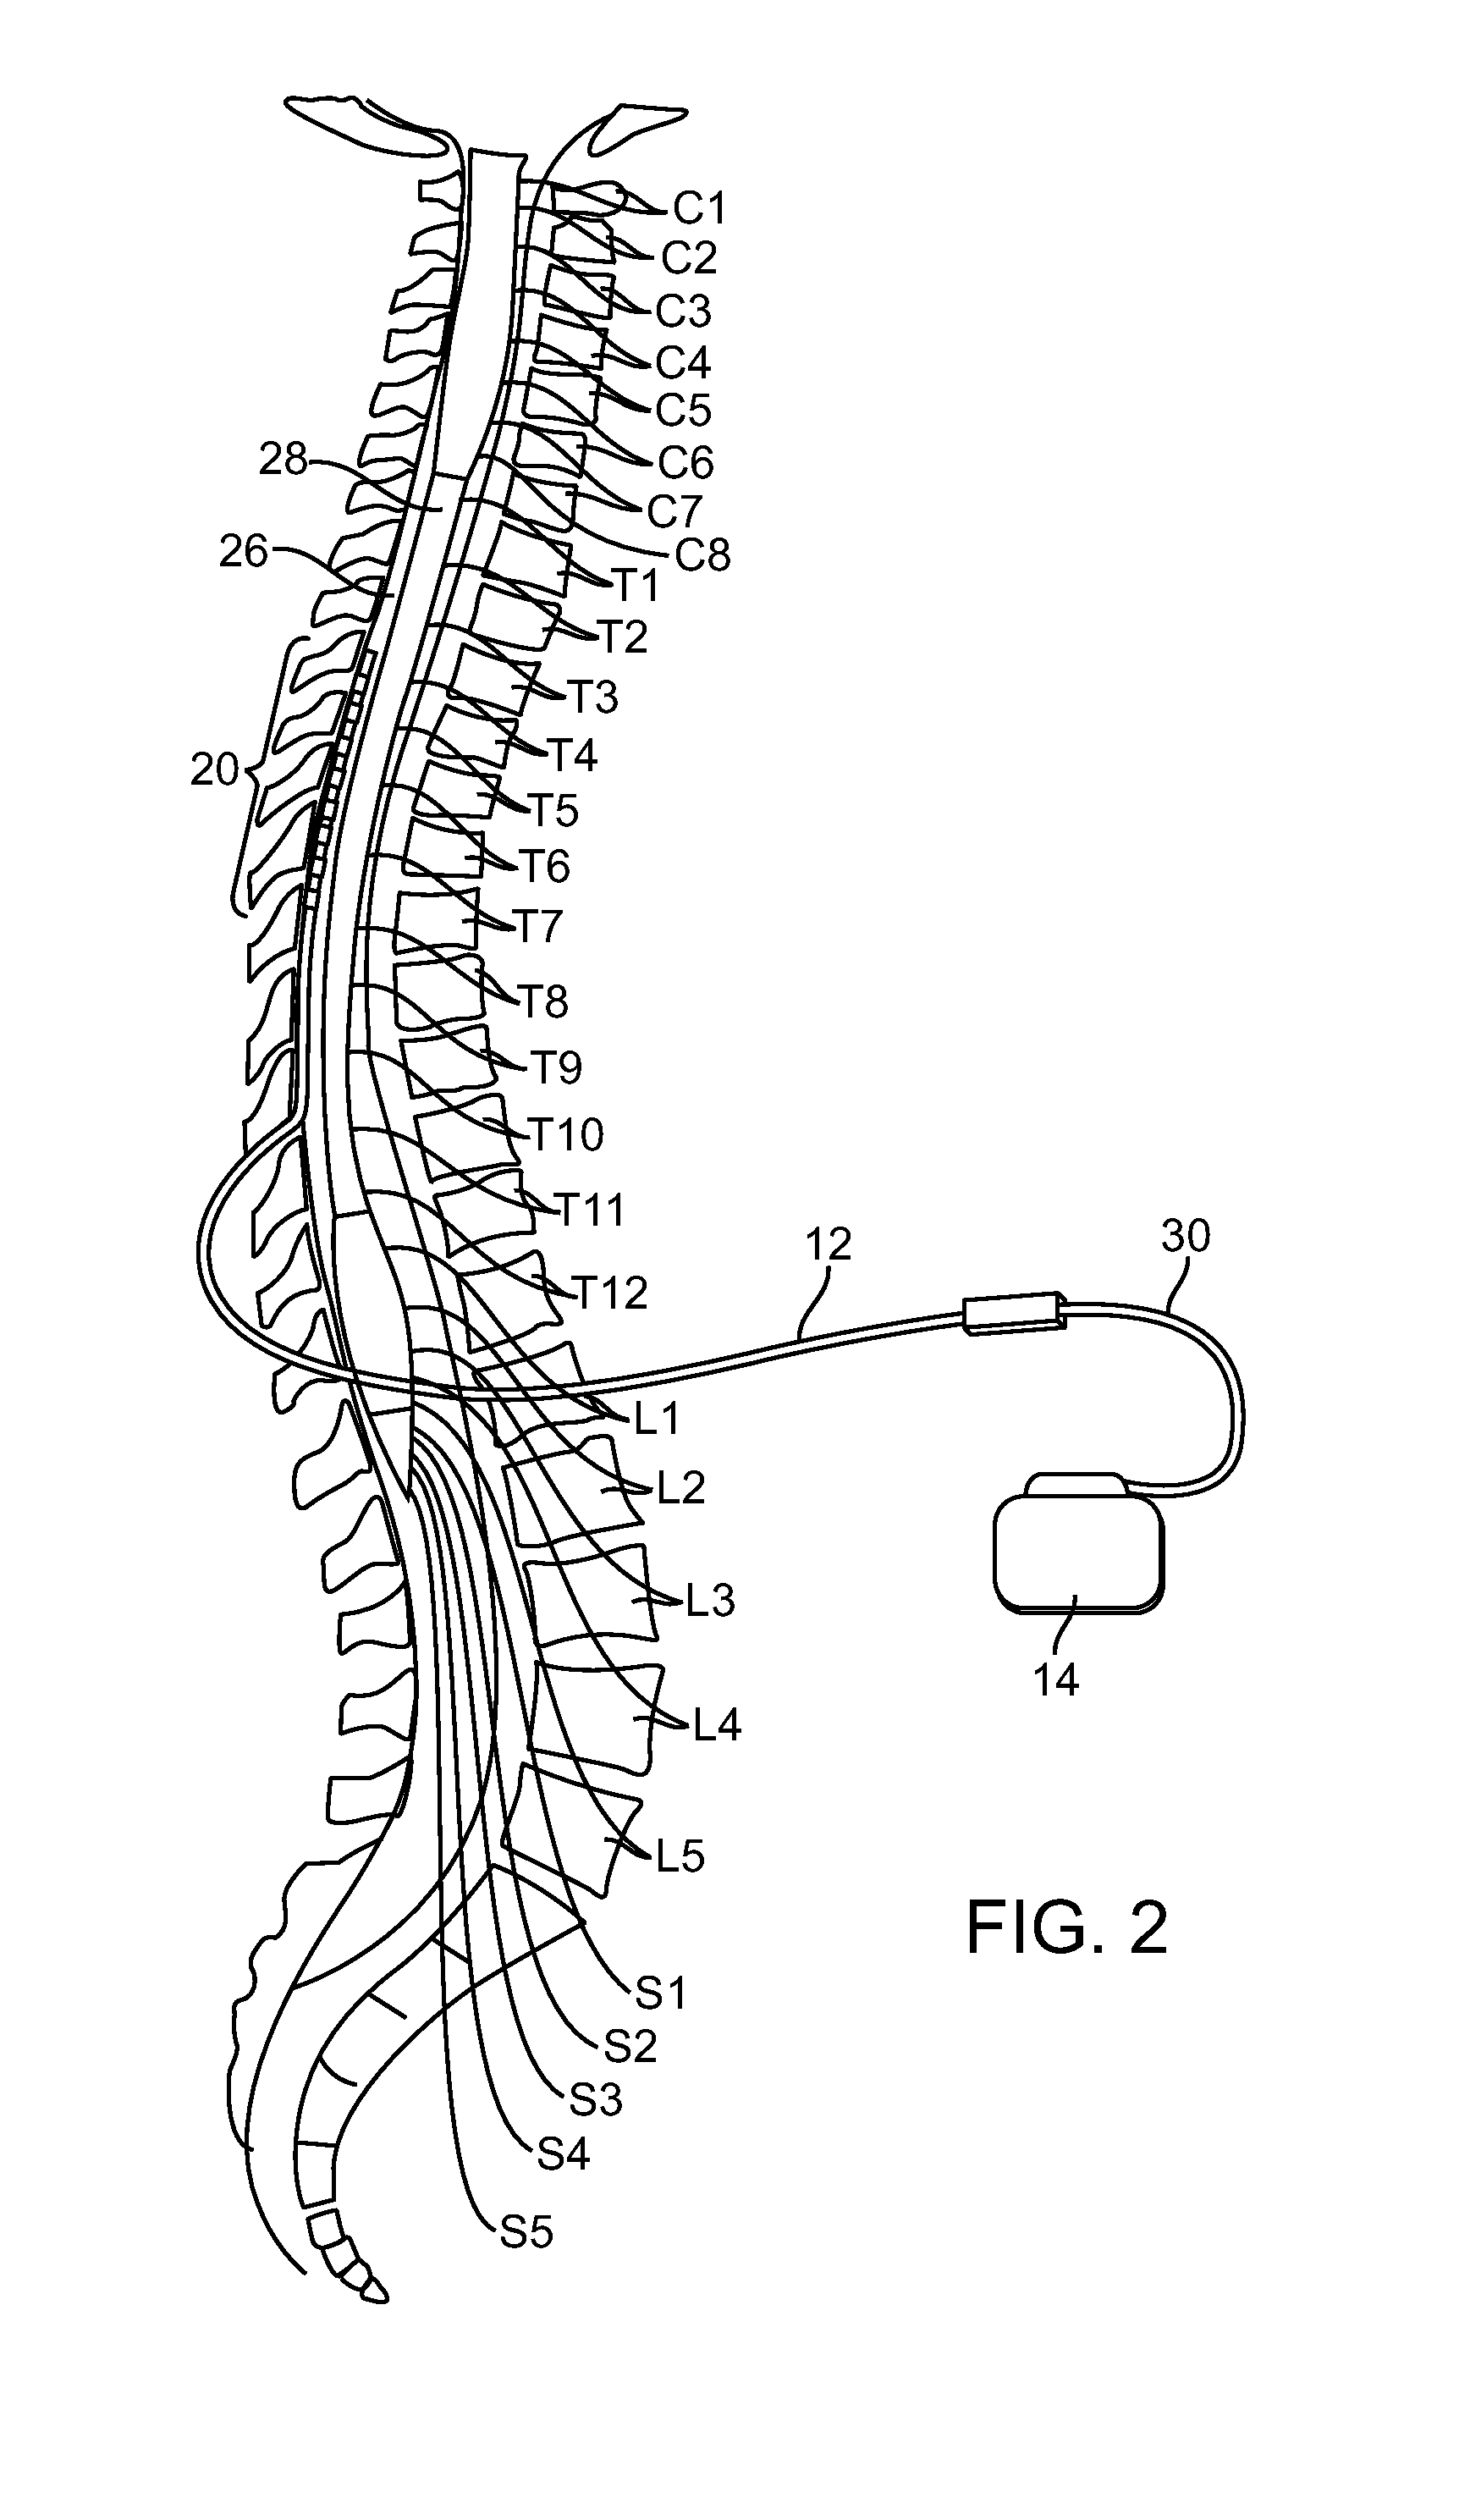 Moldable charger having hinged sections for charging an implantable pulse generator